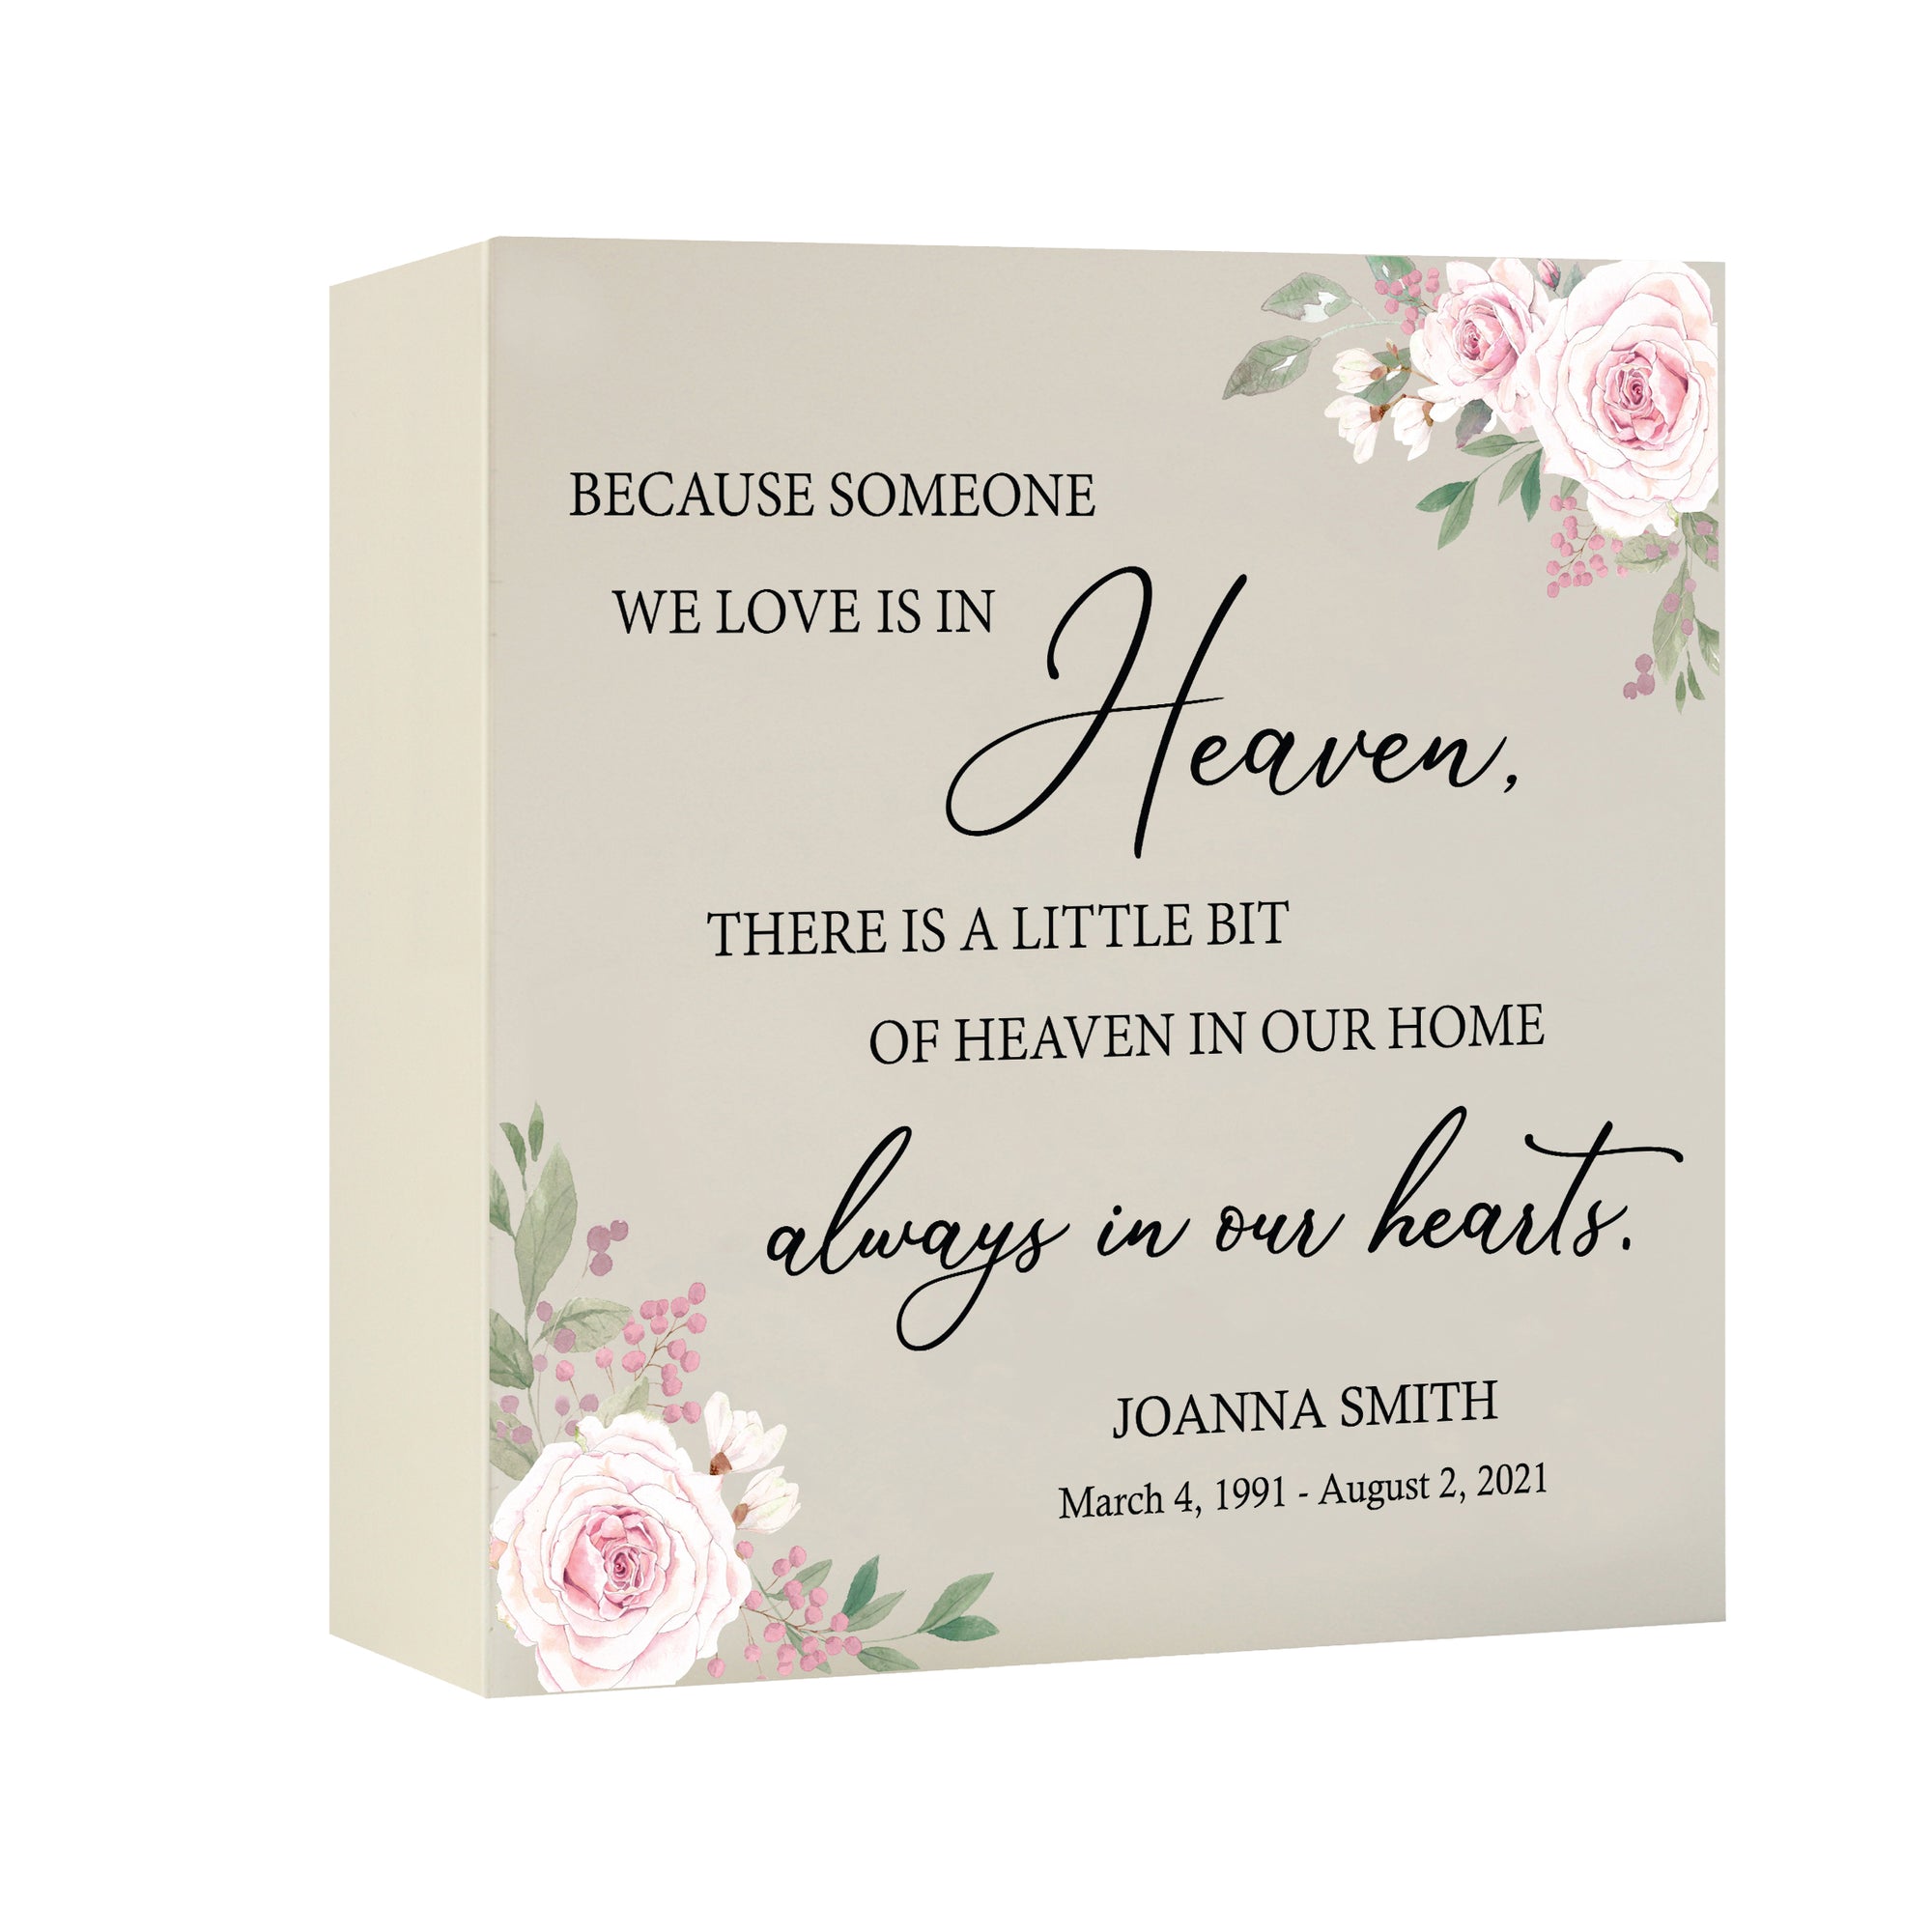 Timeless Human Memorial Shadow Box Urn With Inspirational Verse in Ivory - Because Someone We Love